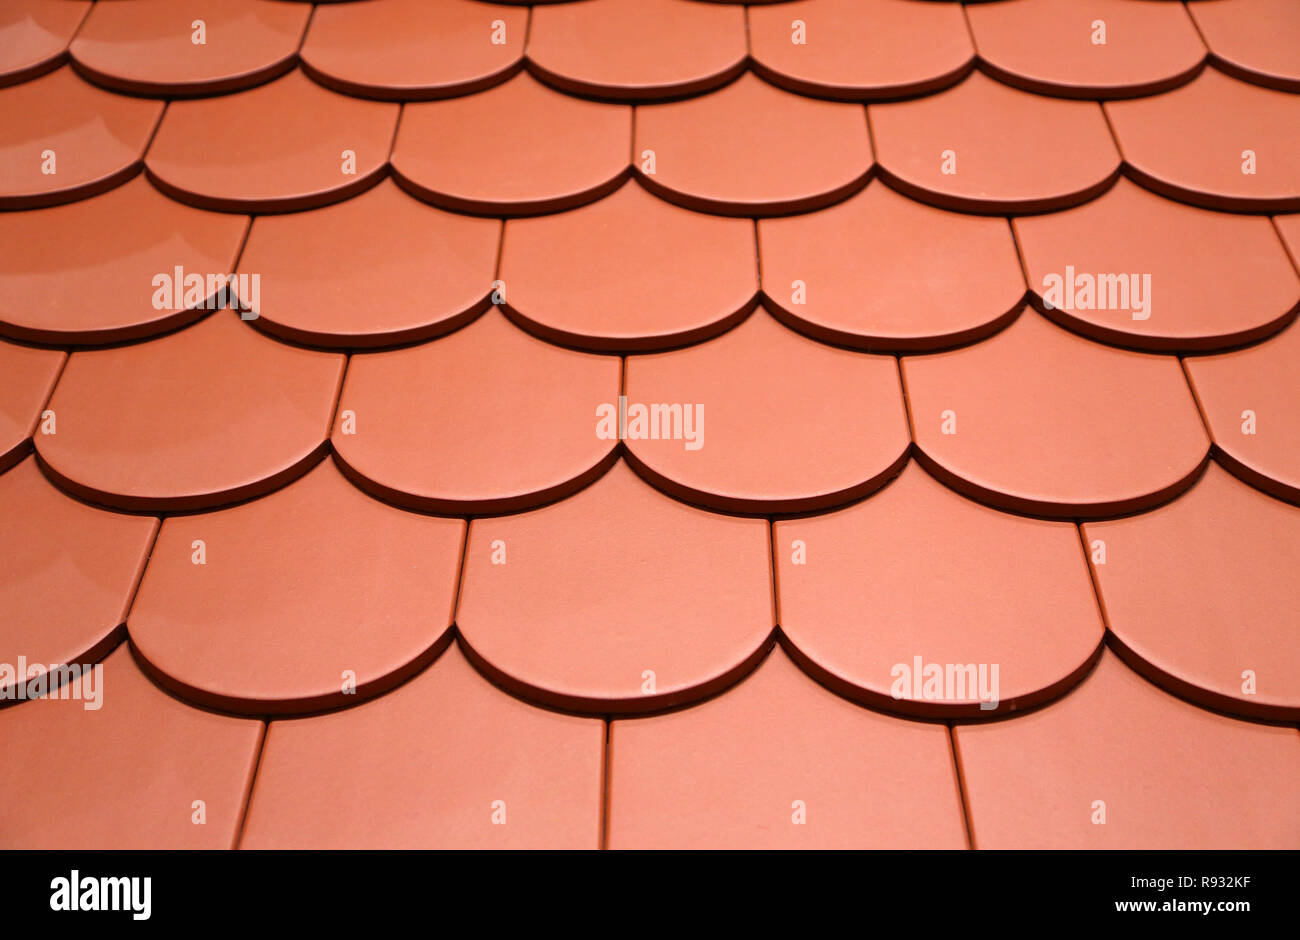 roof covering with flat tiles Stock Photo